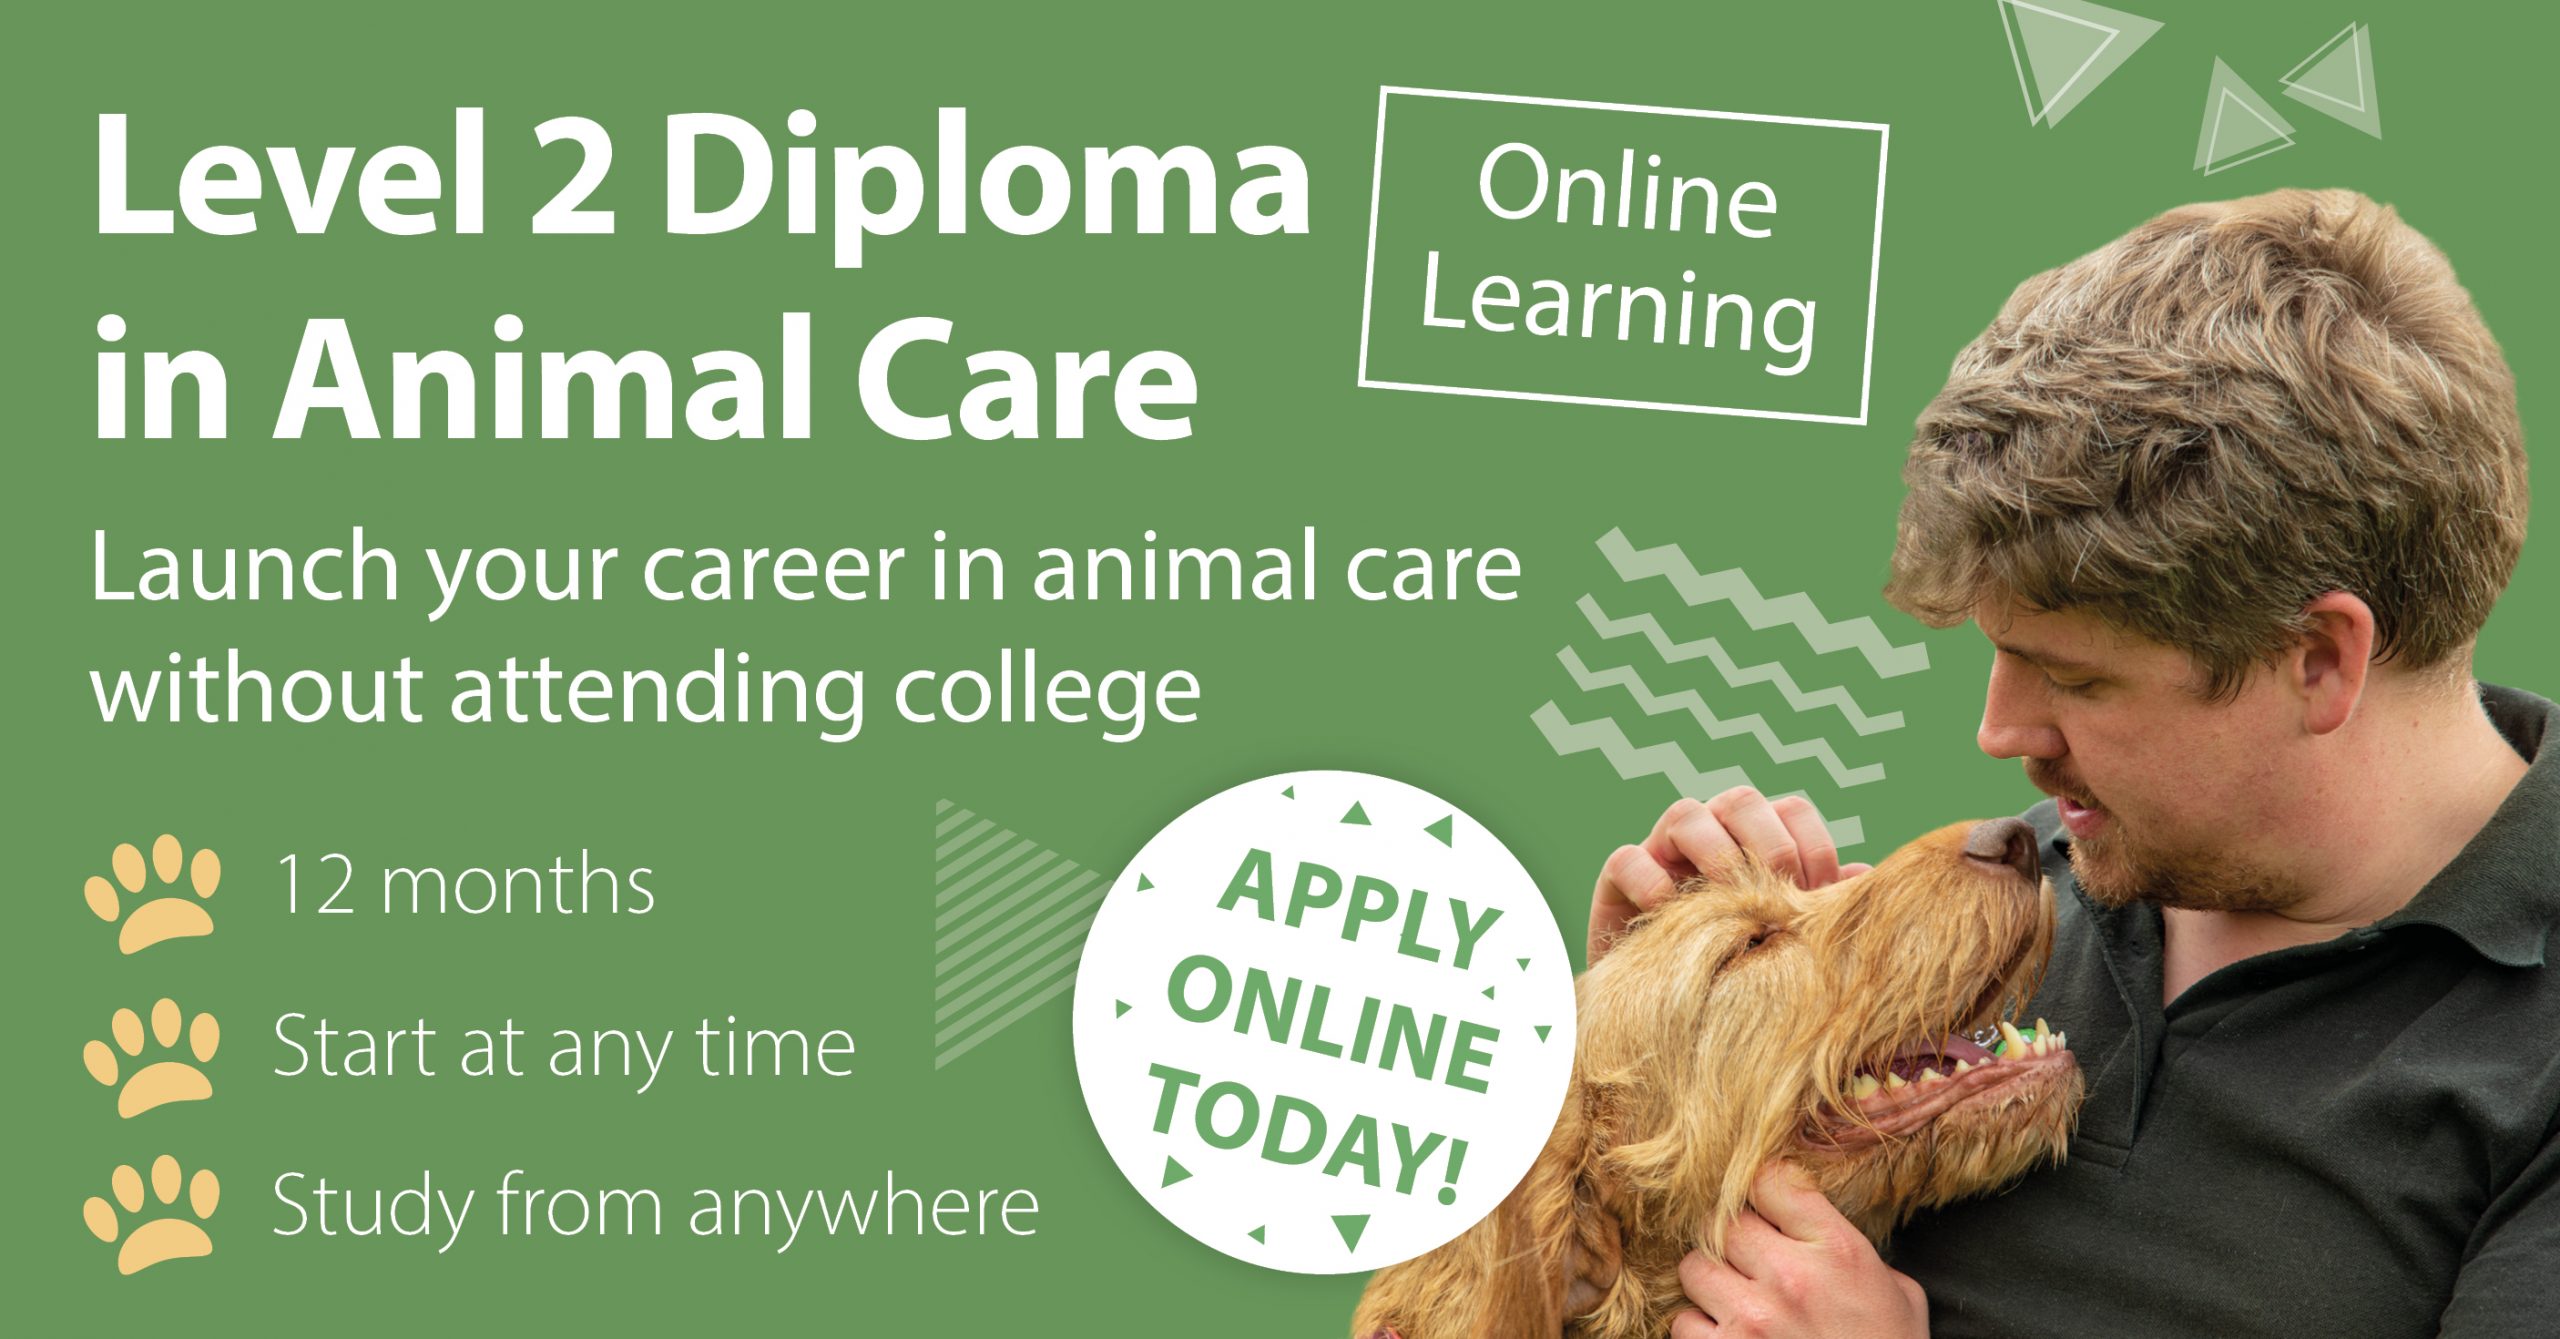 Level 2 Diploma in Animal Care Online Learning | CAW